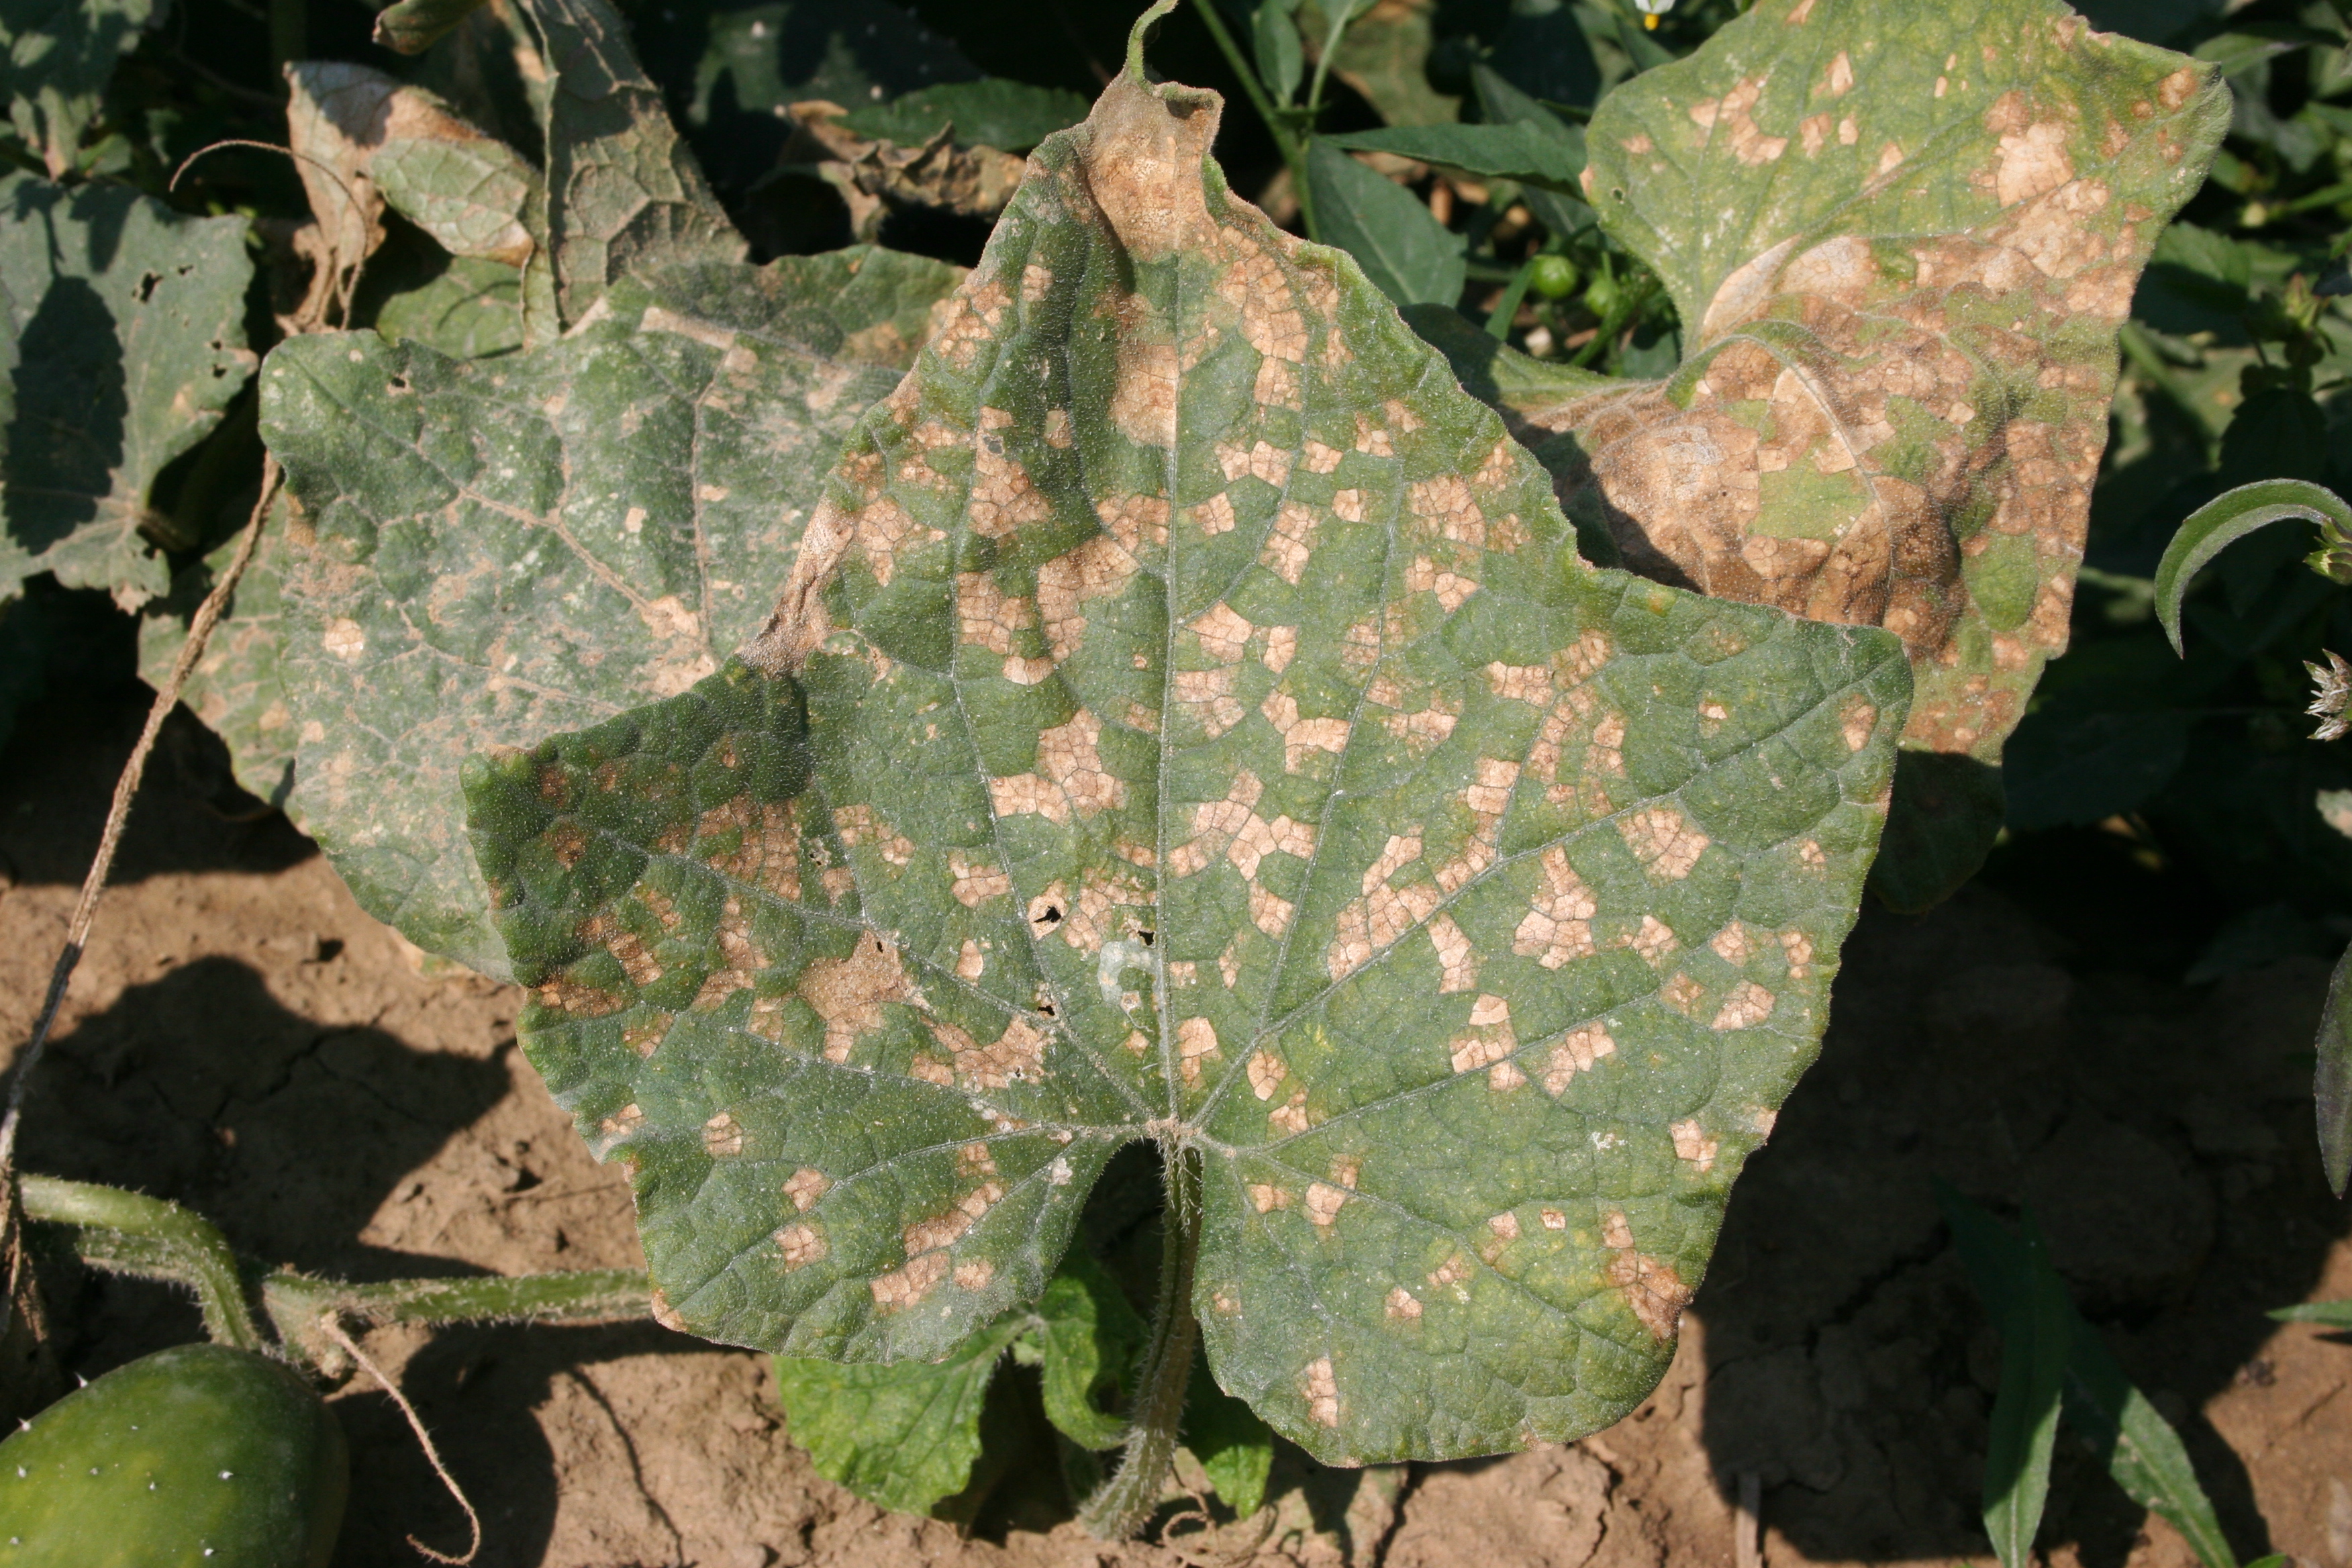 Downy mildew on upper side of cucumber plant foliage.